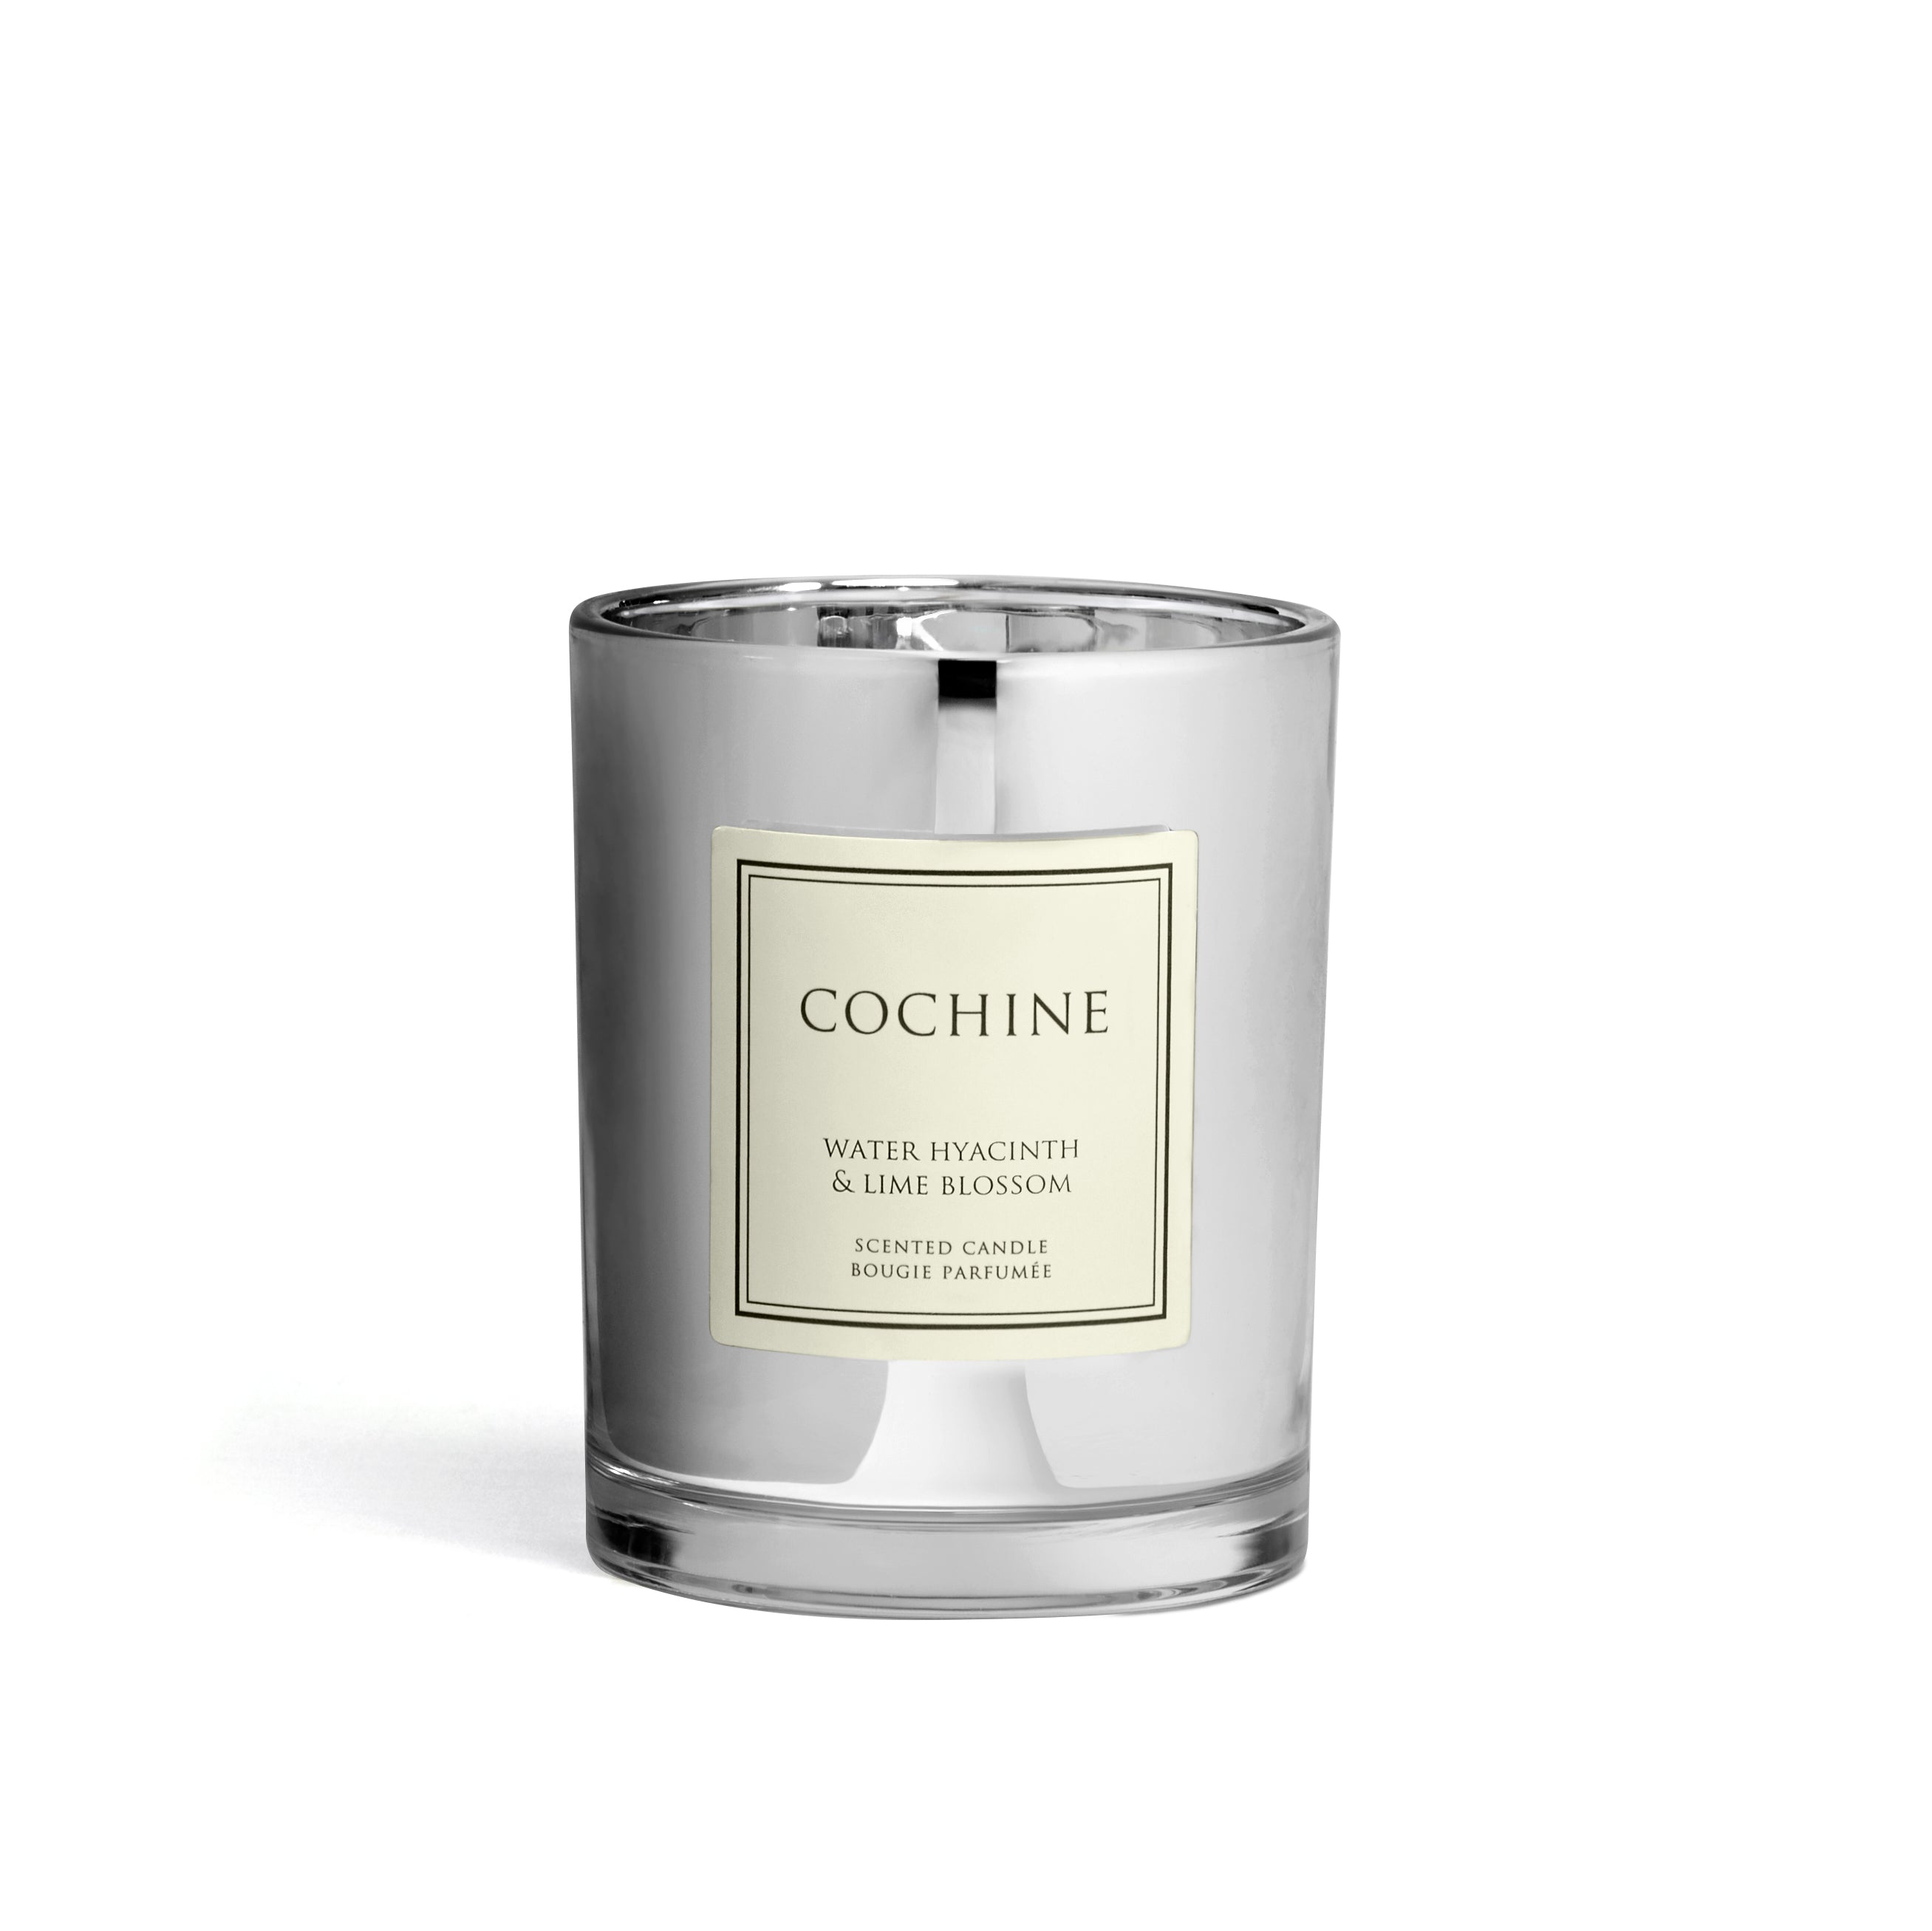 Cochine Water Hyacinth & Lime Blossom Scented Candle